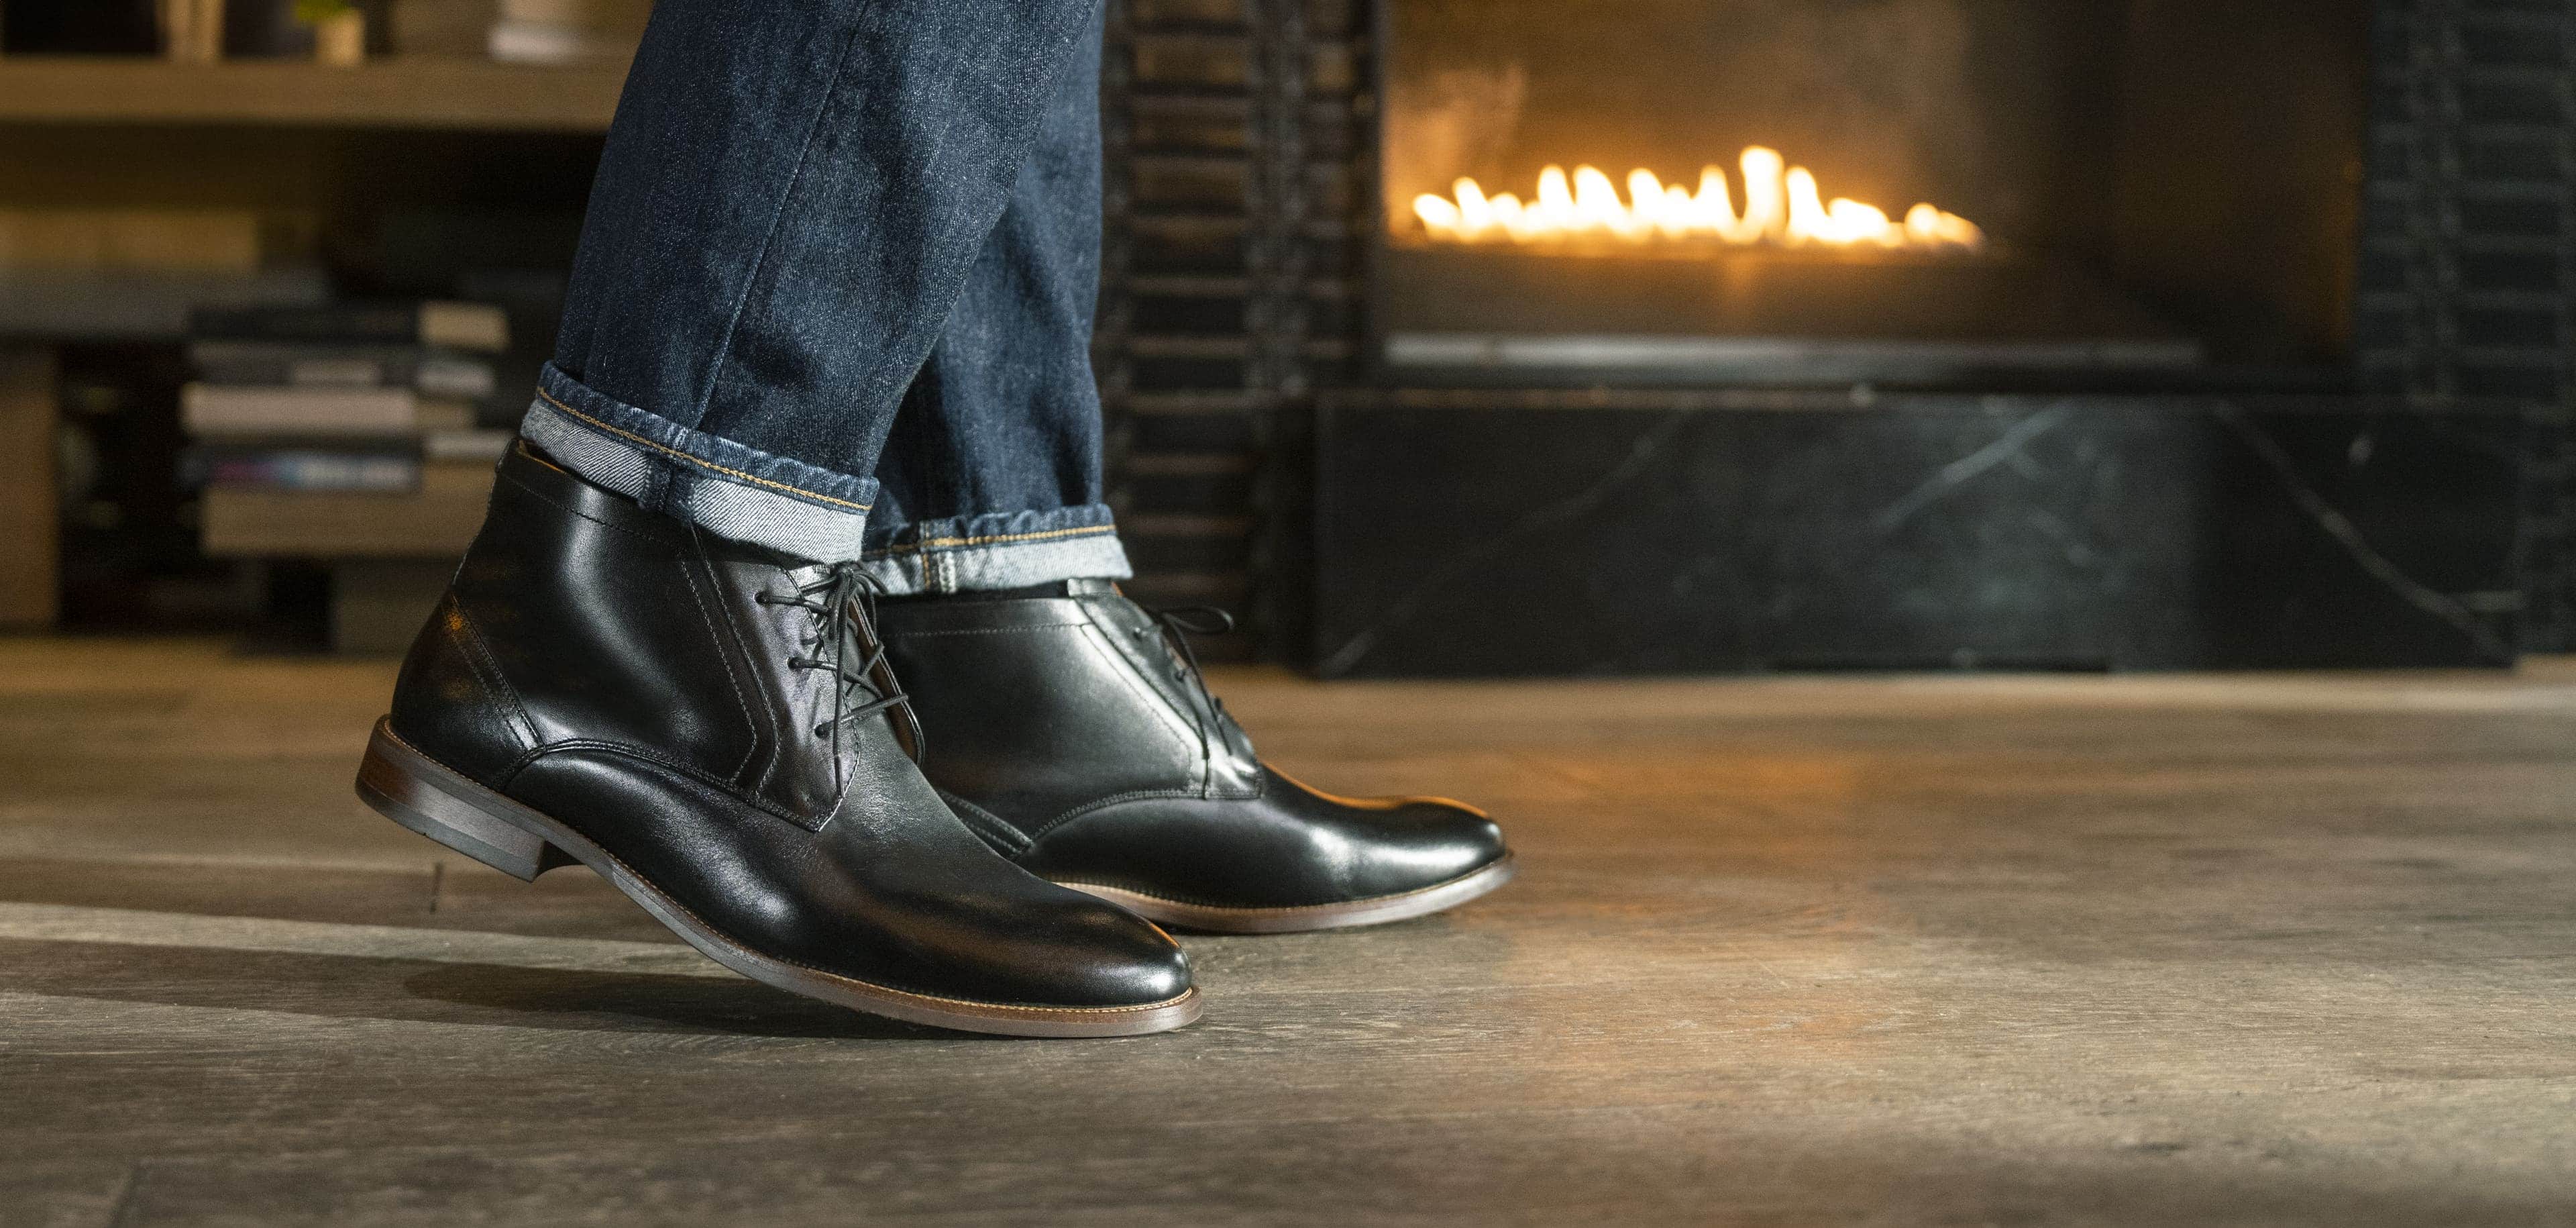 Click to shop Florsheim new arrivals. Image features the Rucci Chukka in black.